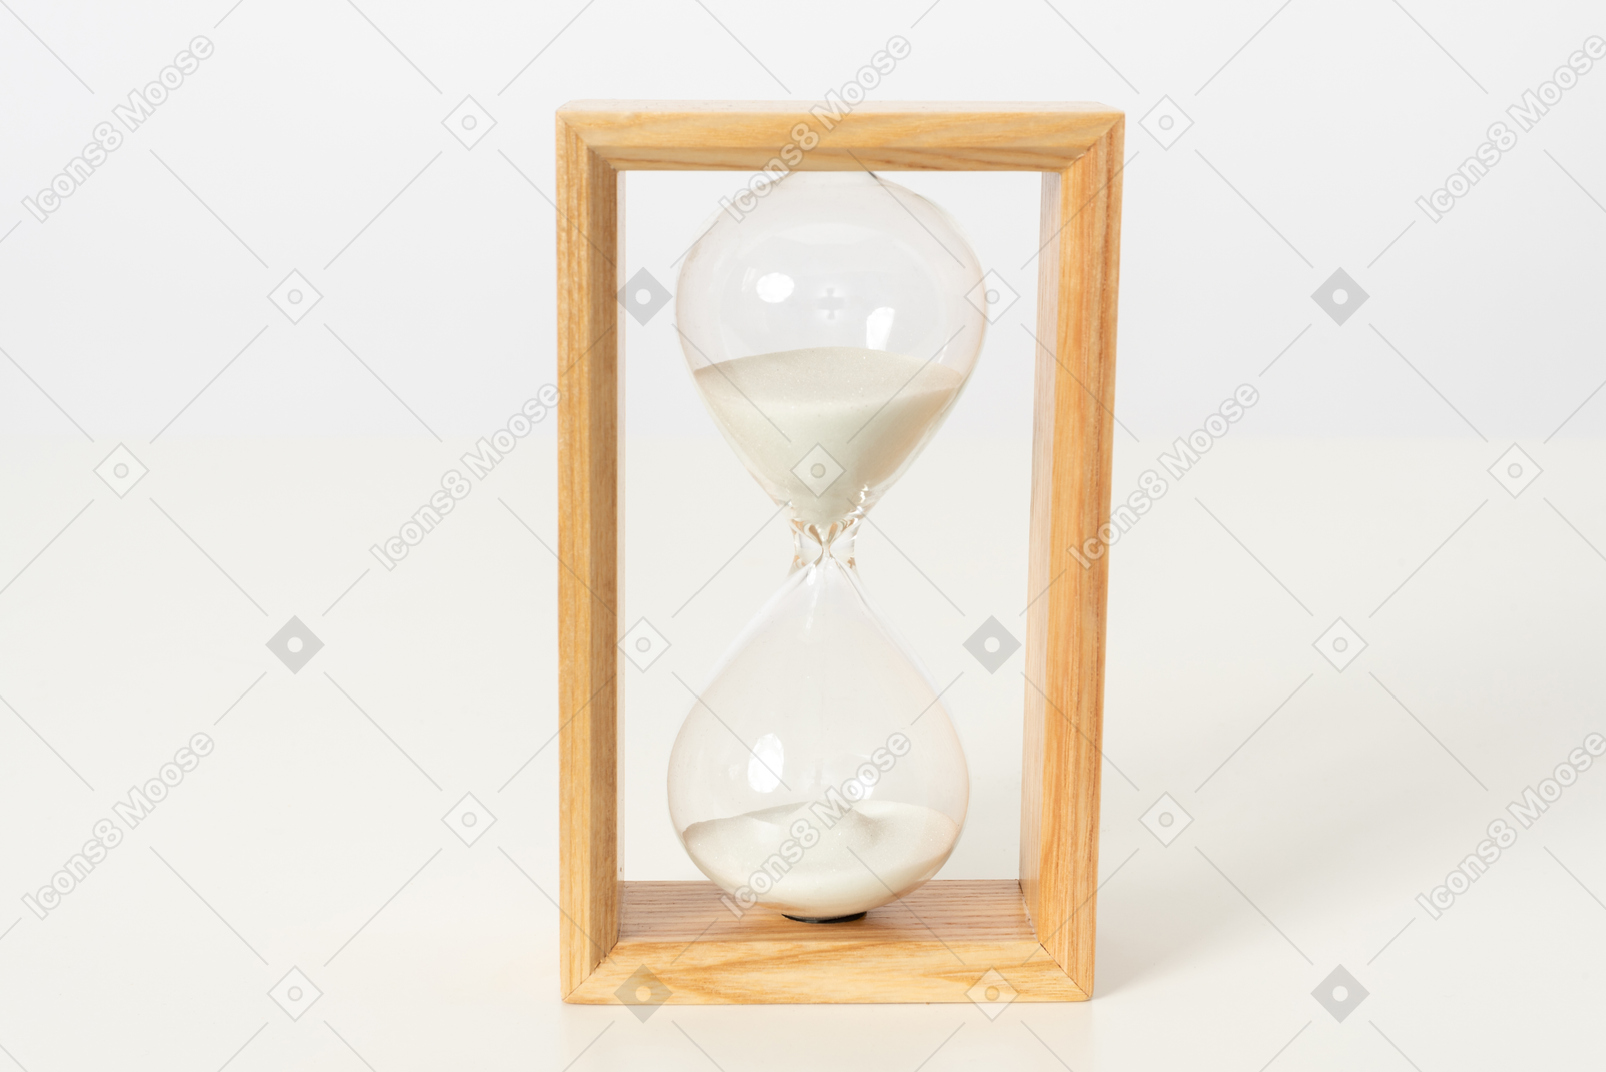 Wooden hourglass on a white background